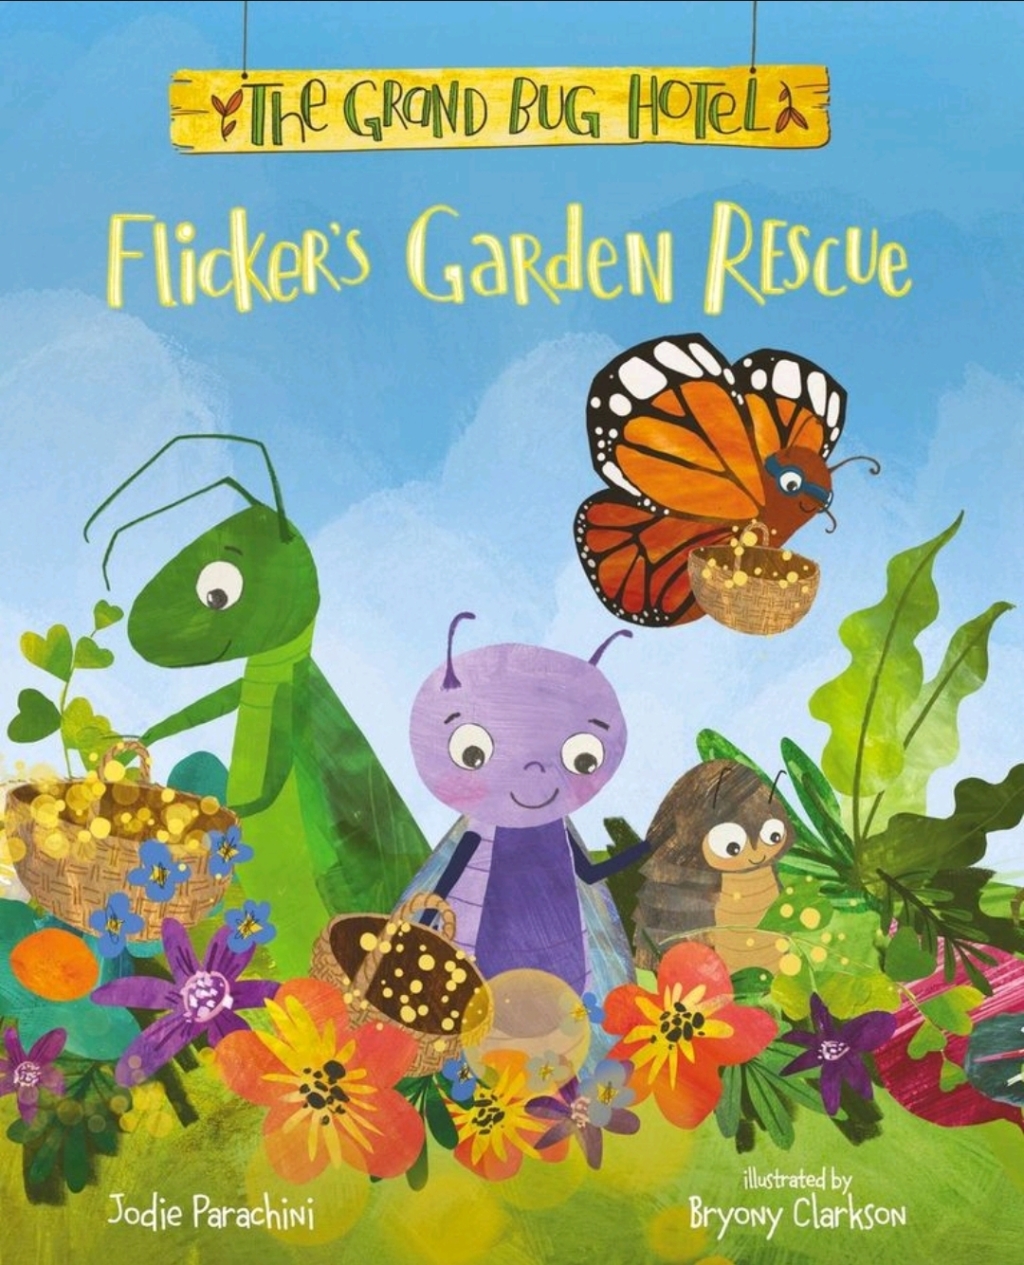 Flicker’s Garden Rescue by Jodie Parachini and illustrated by Bryony Clarkson @JodieParachini @rararesources #FlickersGardenRescue #BookTwitter